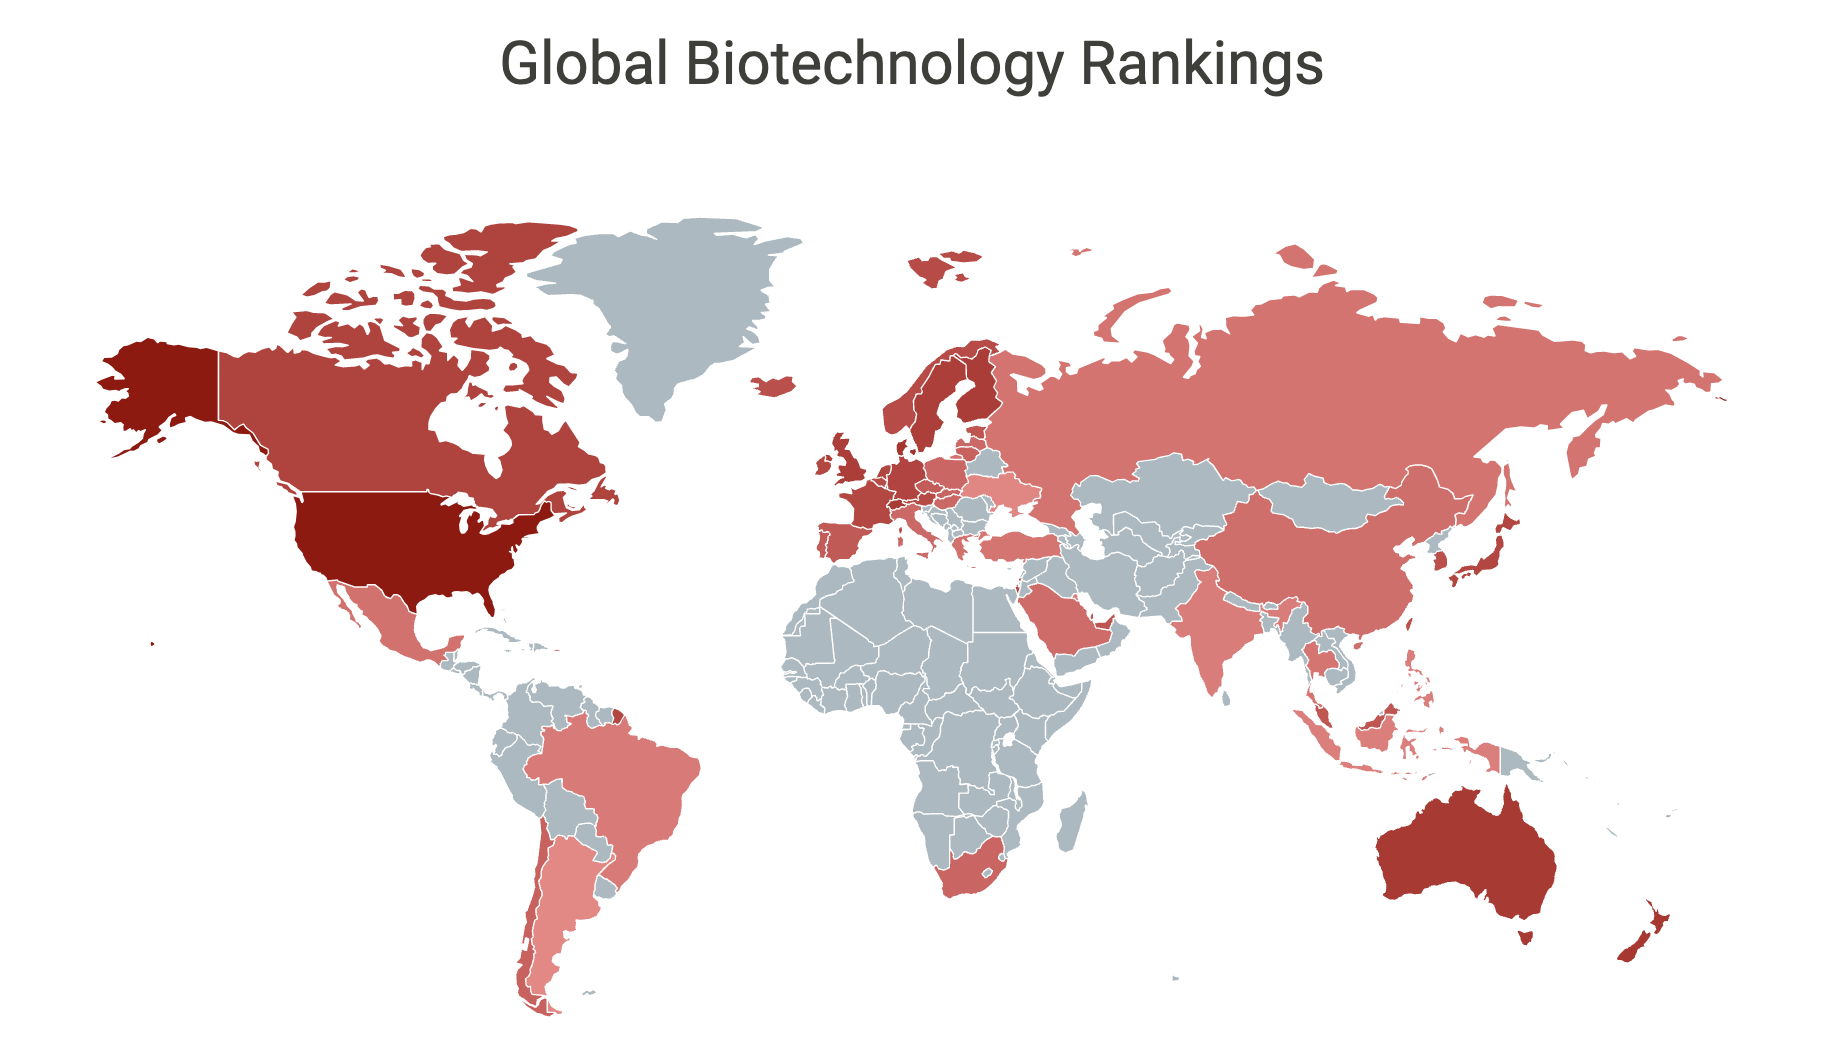 World map that shows global biotechnology ranking based by country.